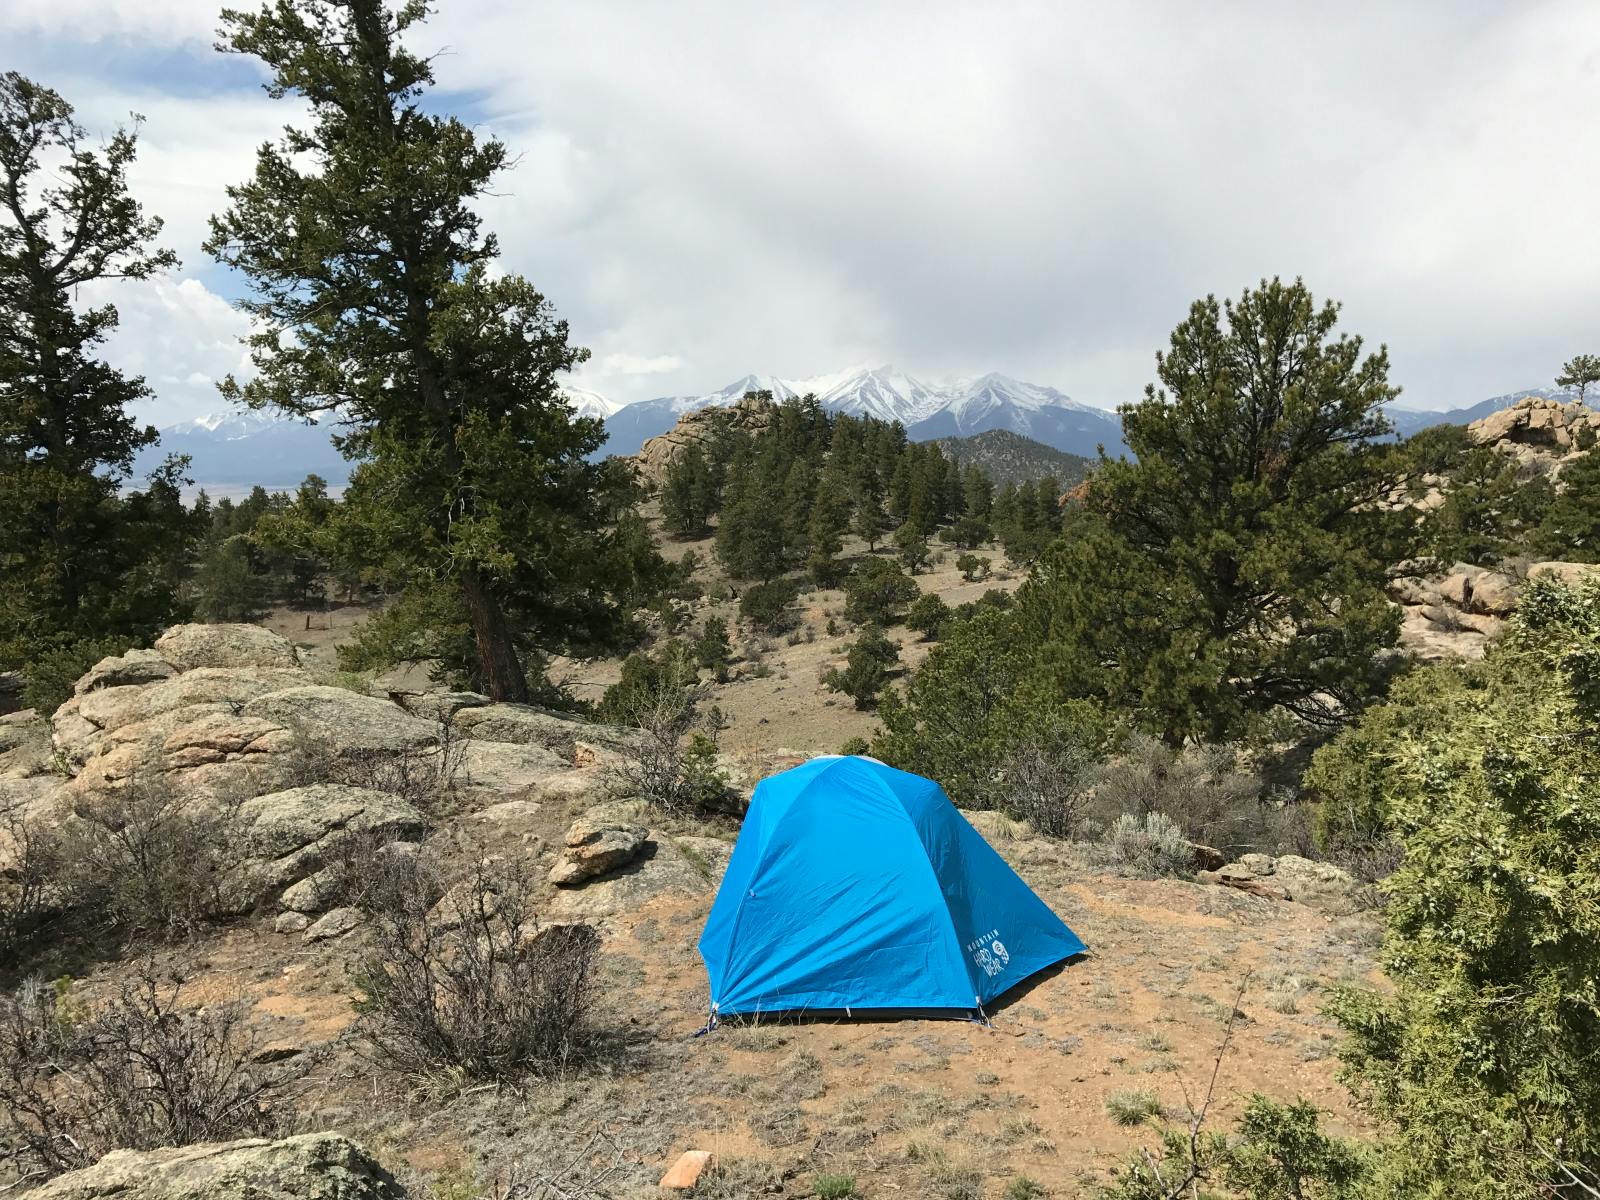 A blue tent on a mountain plateau surrounded by some trees and brush.